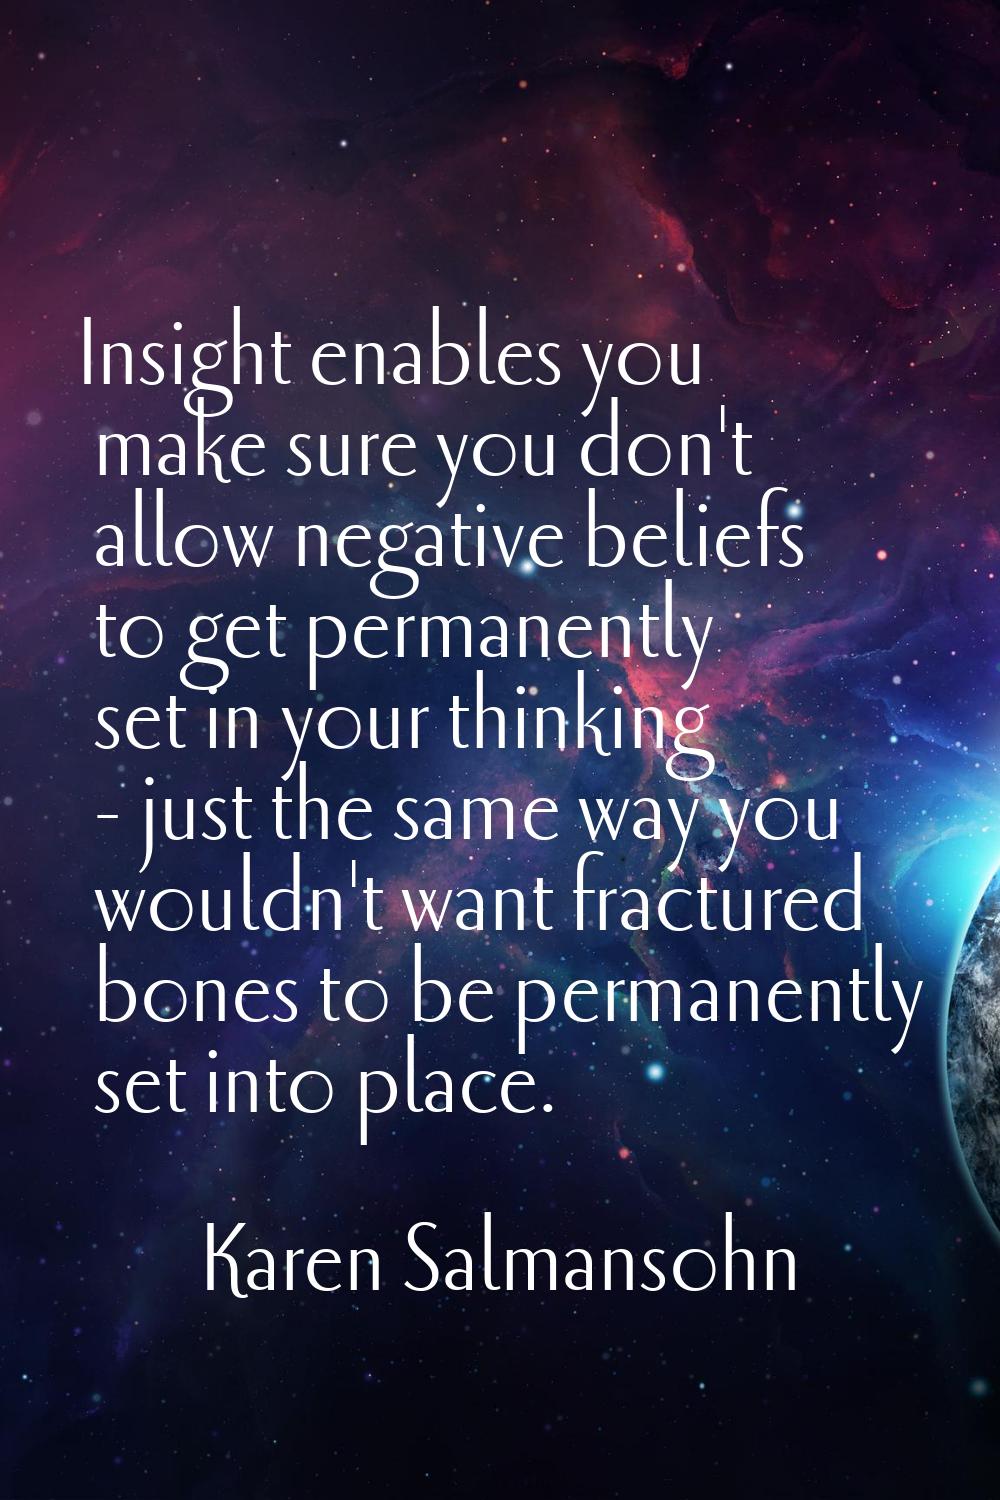 Insight enables you make sure you don't allow negative beliefs to get permanently set in your think